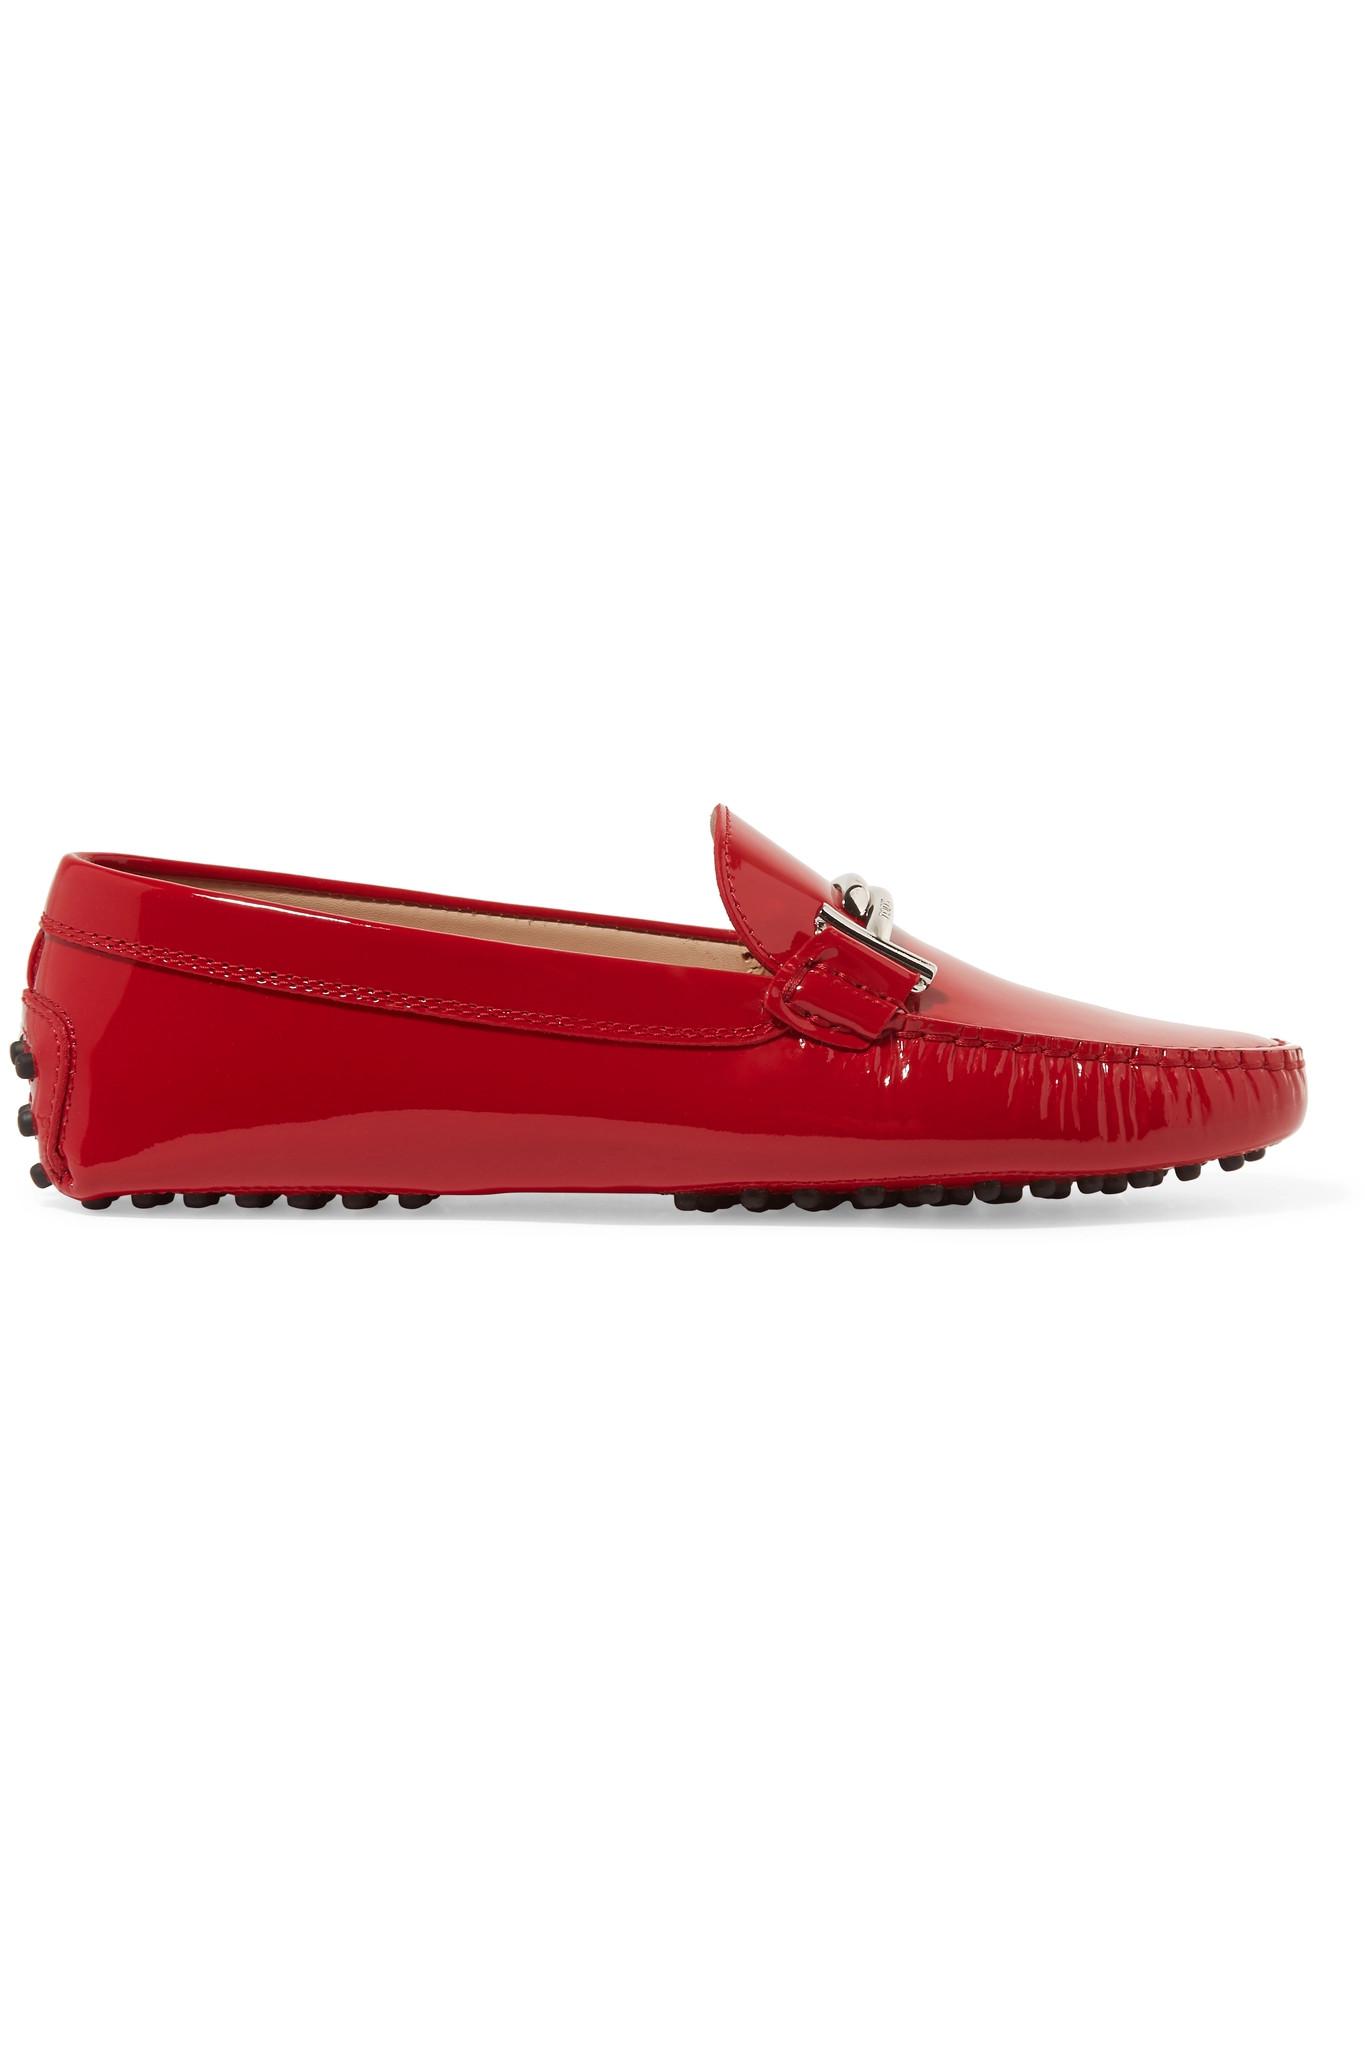 Lyst - Tod'S Gommino Embellished Patent-leather Loafers in Red